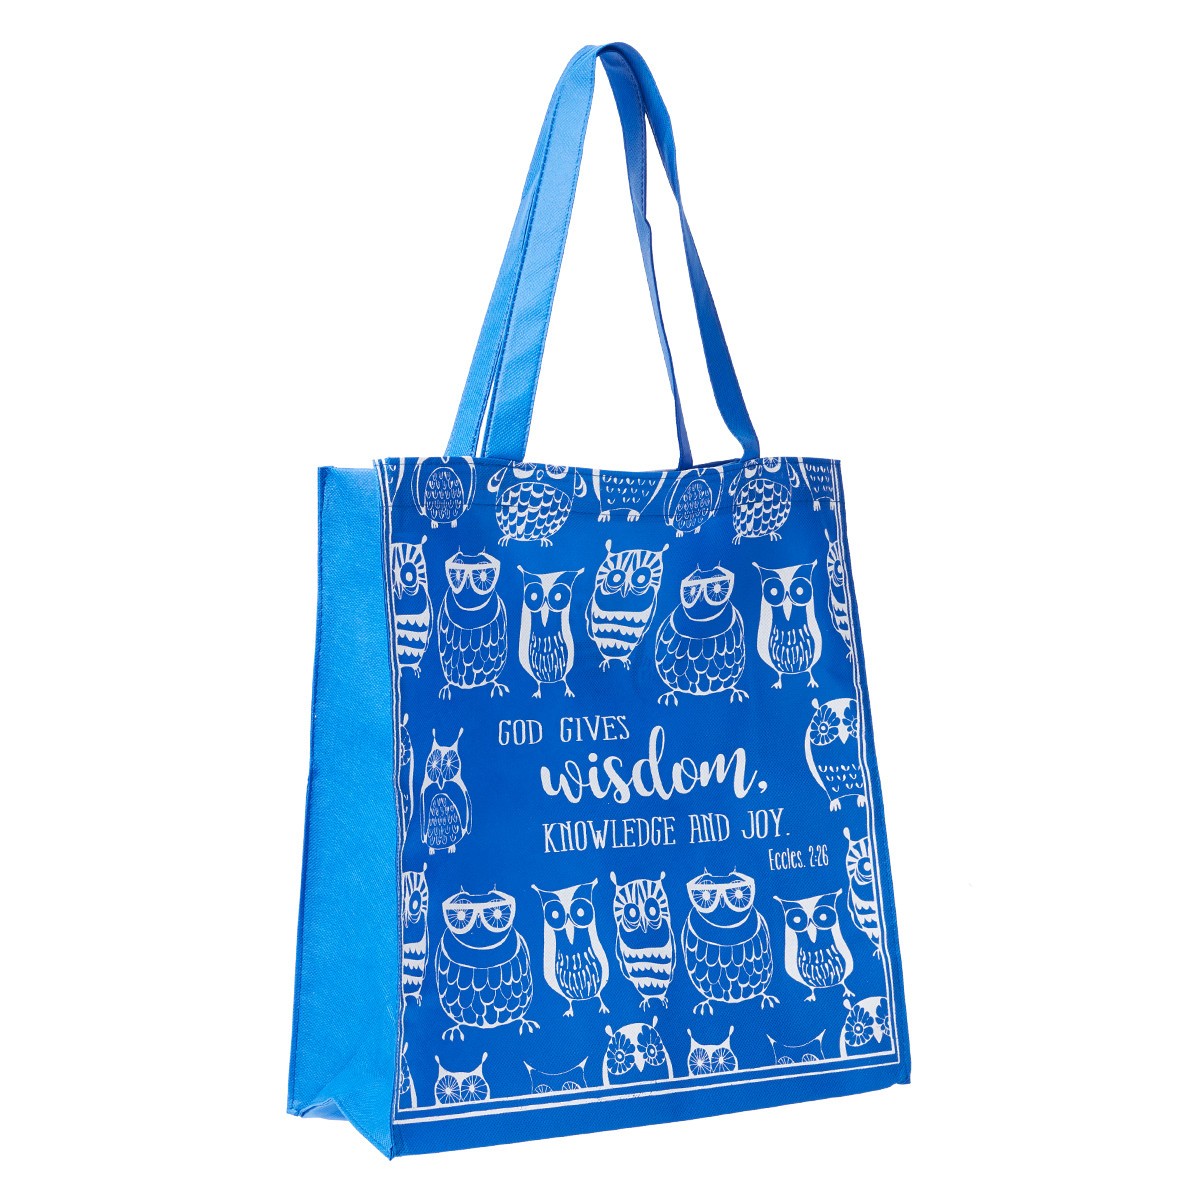 Jesus Christ Tote Bags for Sale | Redbubble